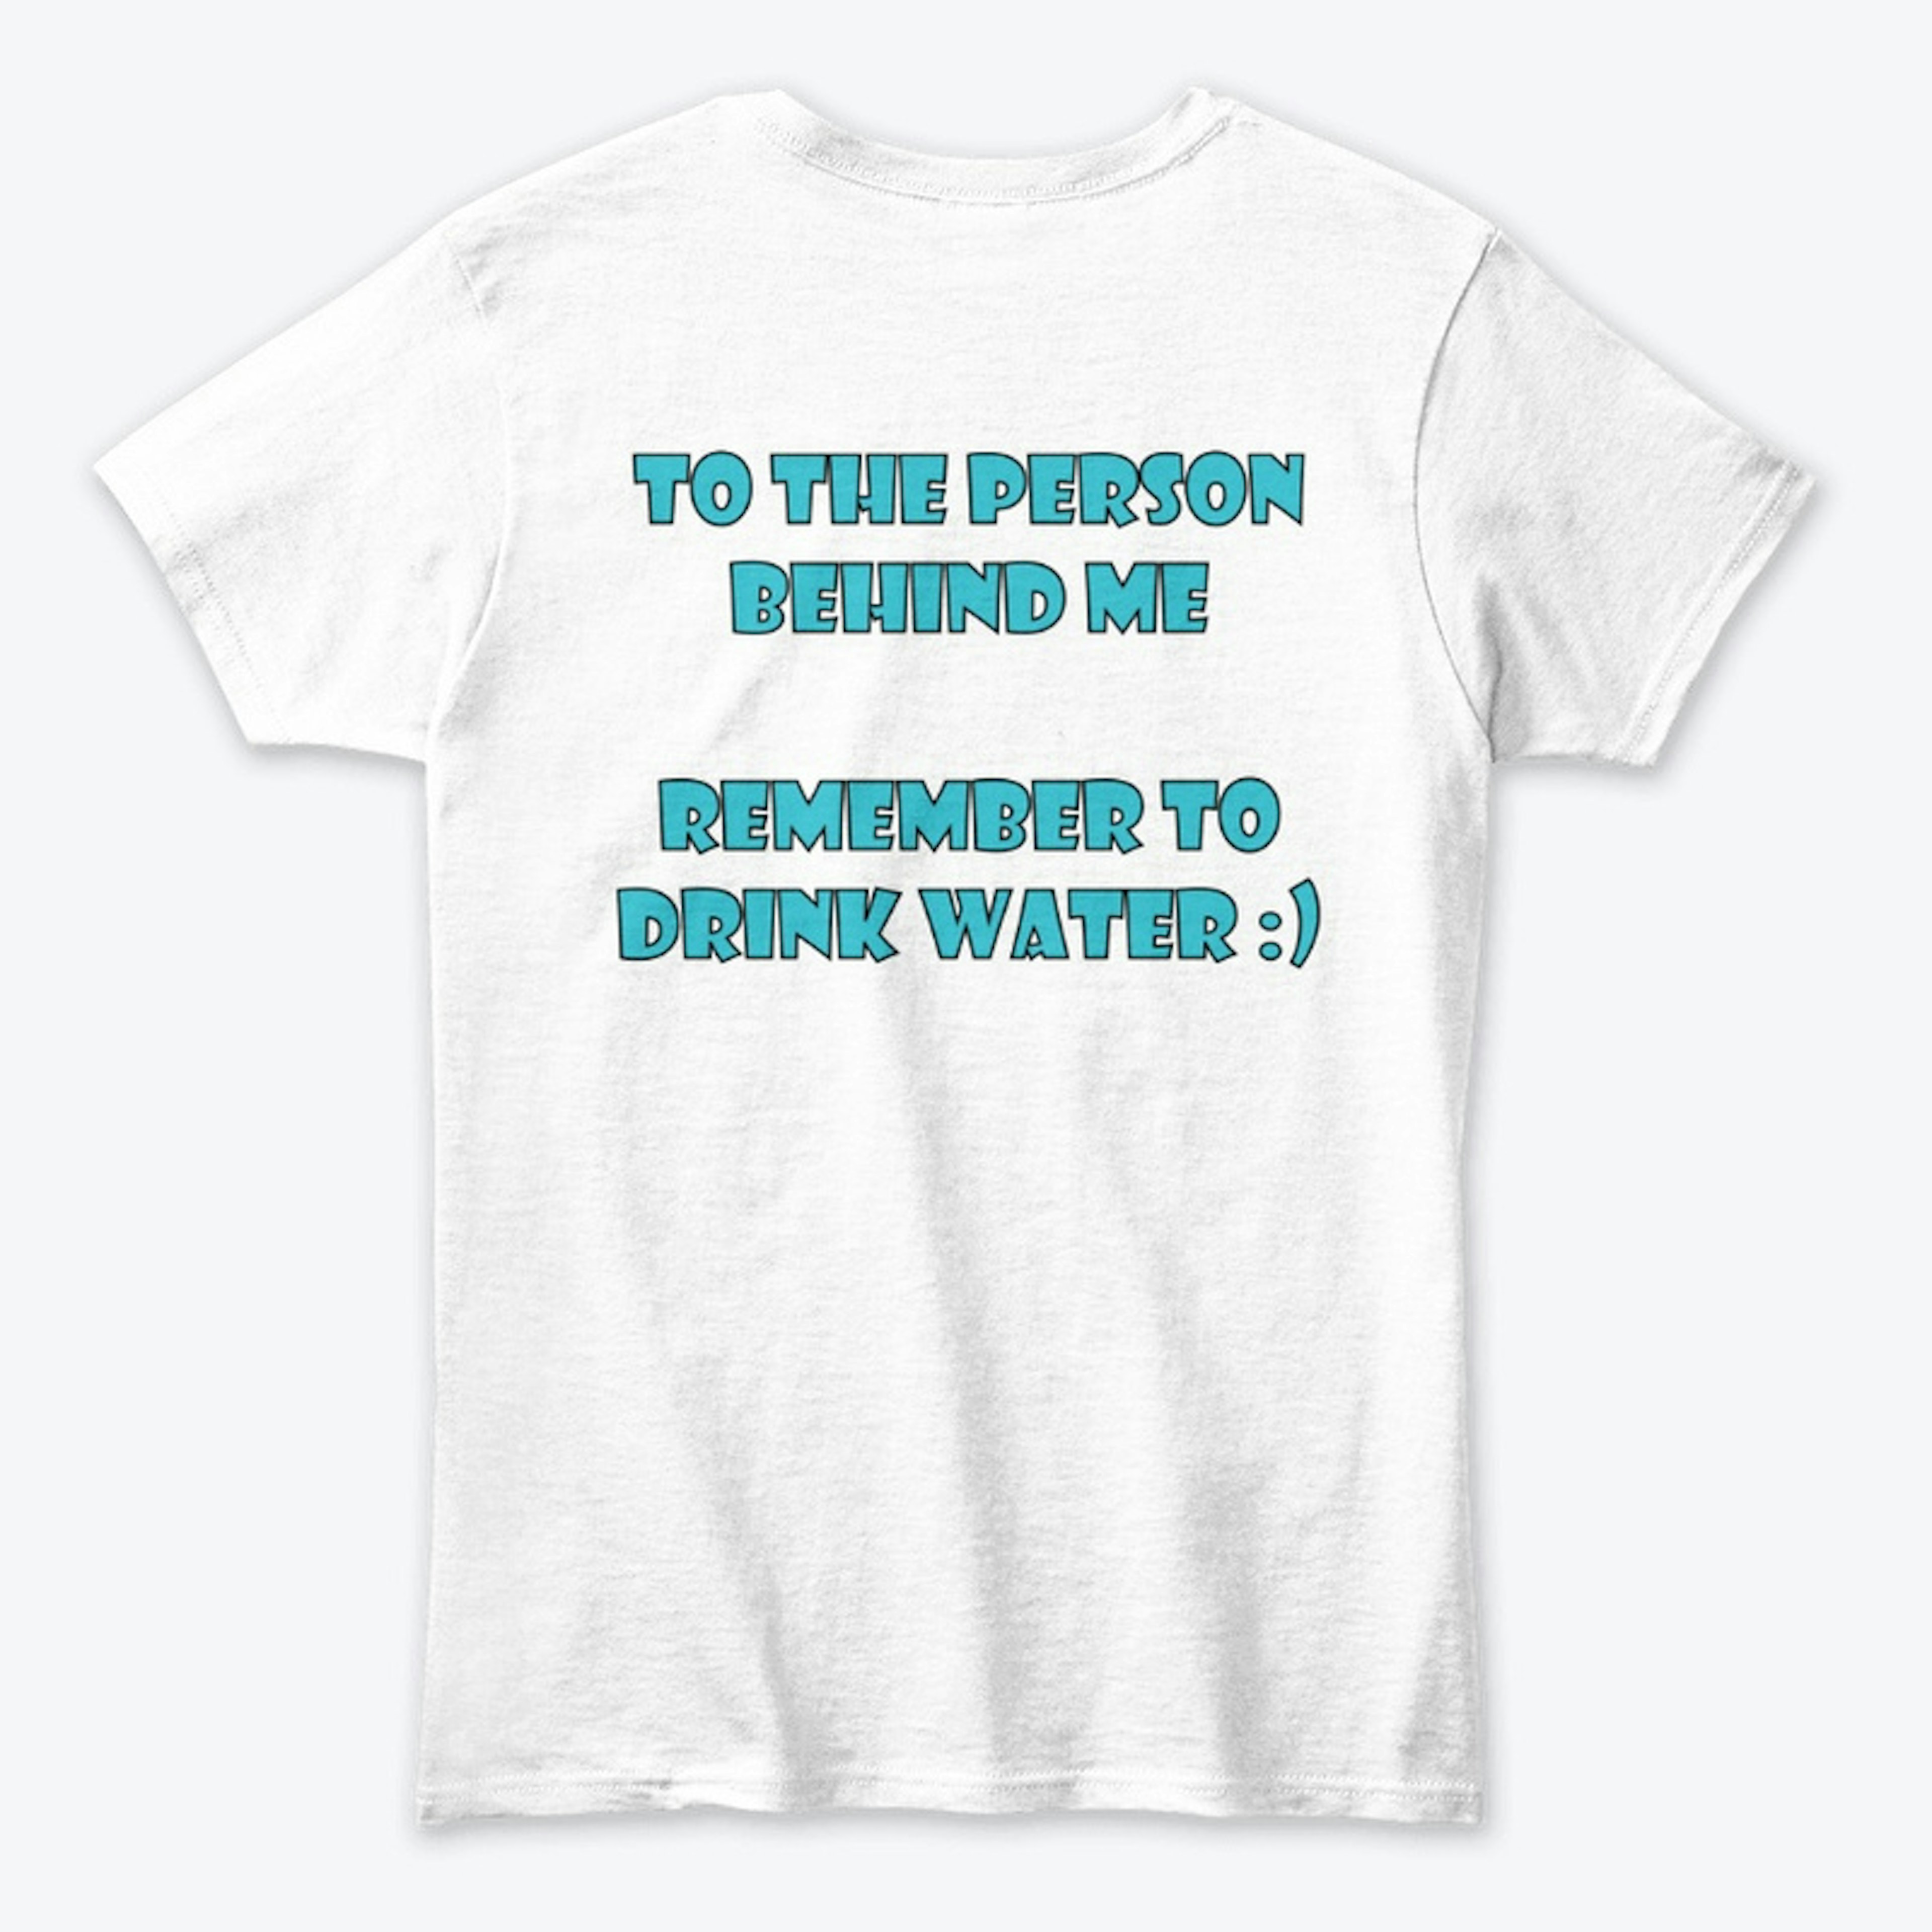 Remember to Drink Water :)